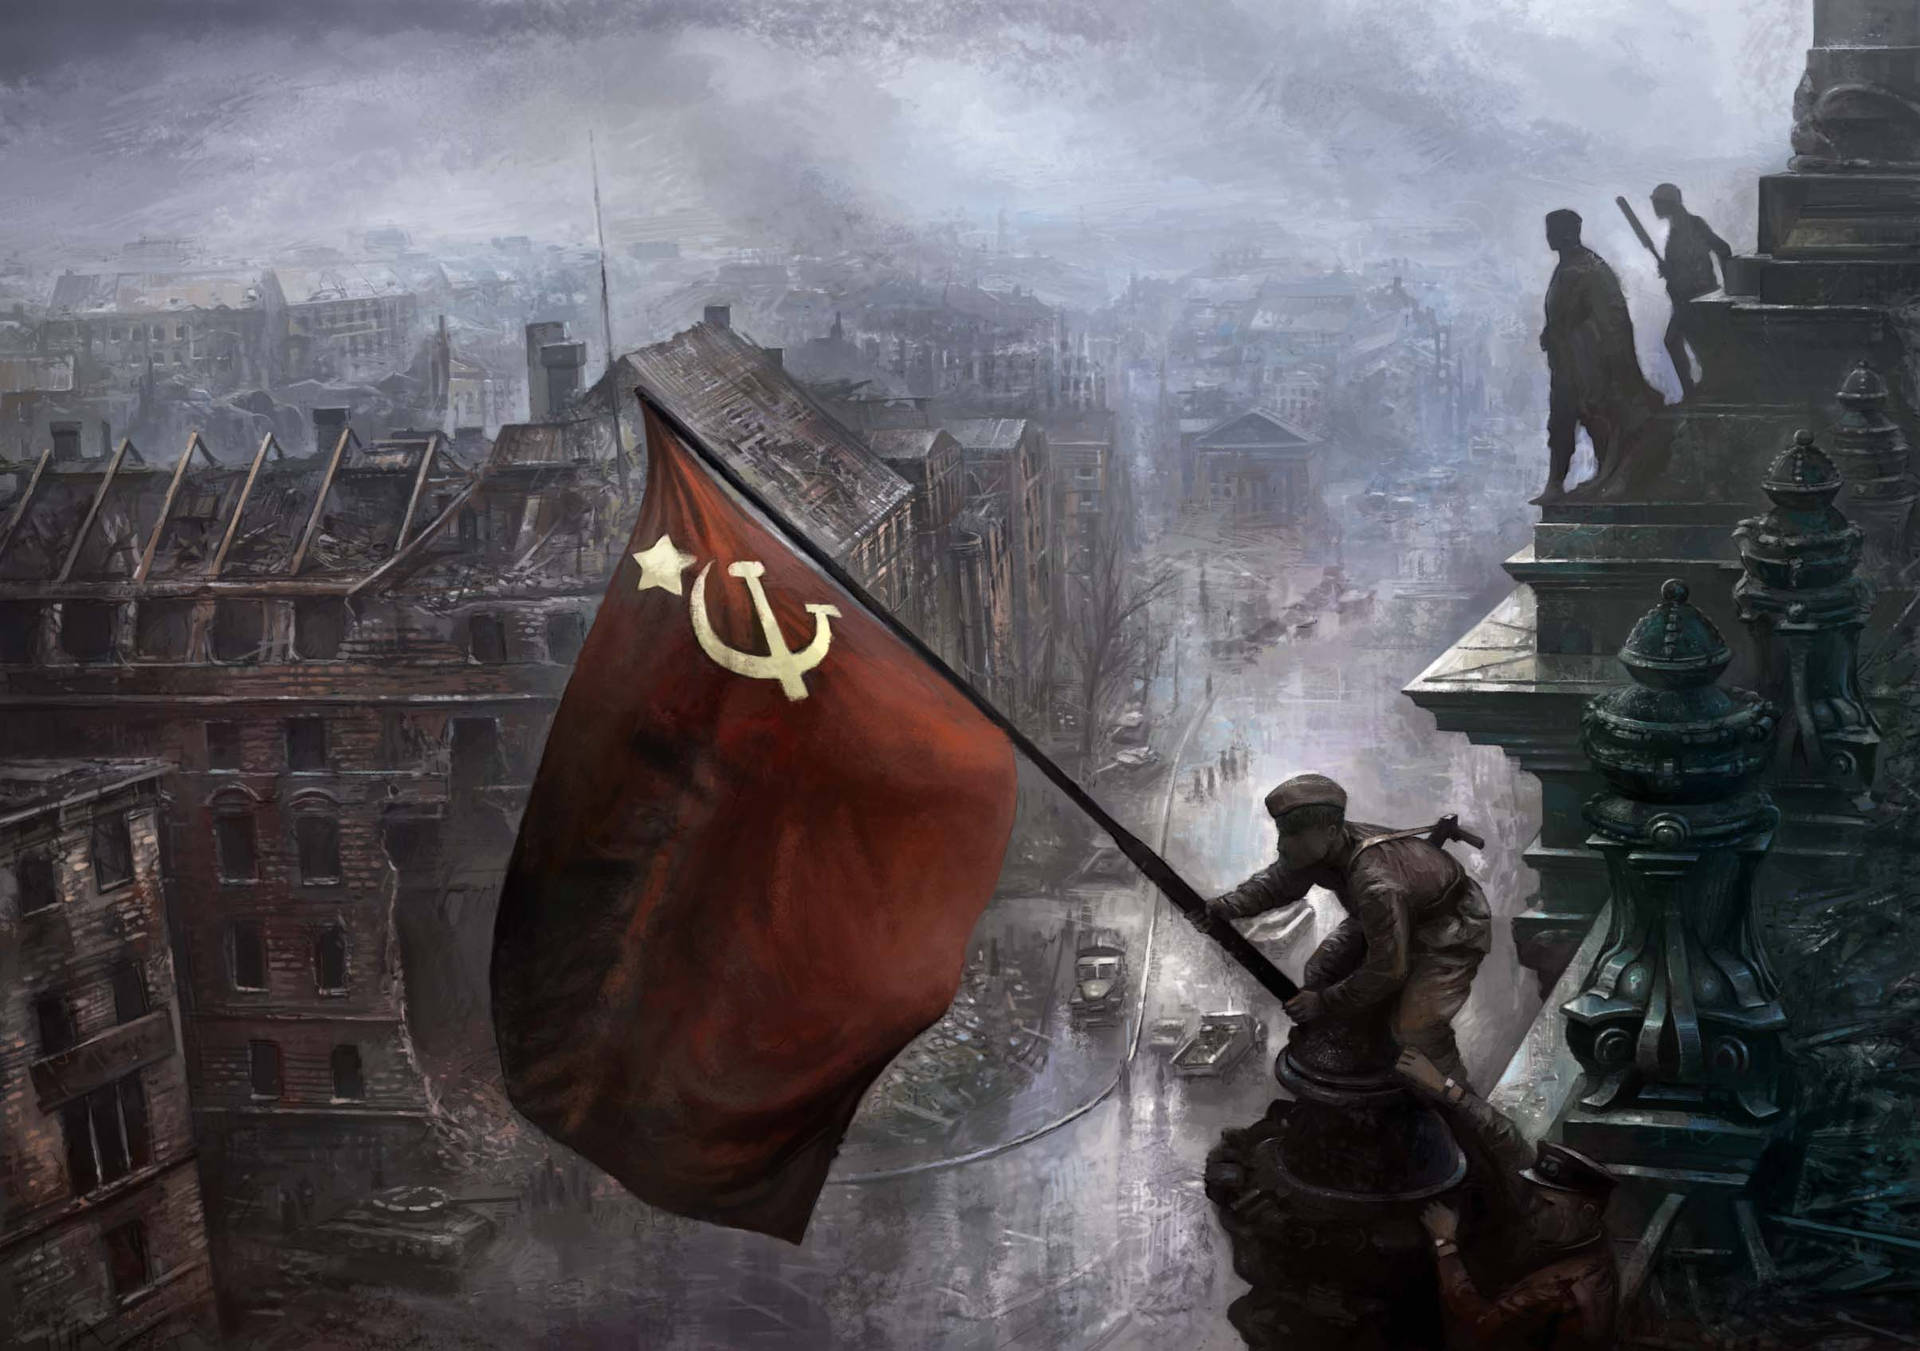 Soviet Flags Fly Over War Zone Background